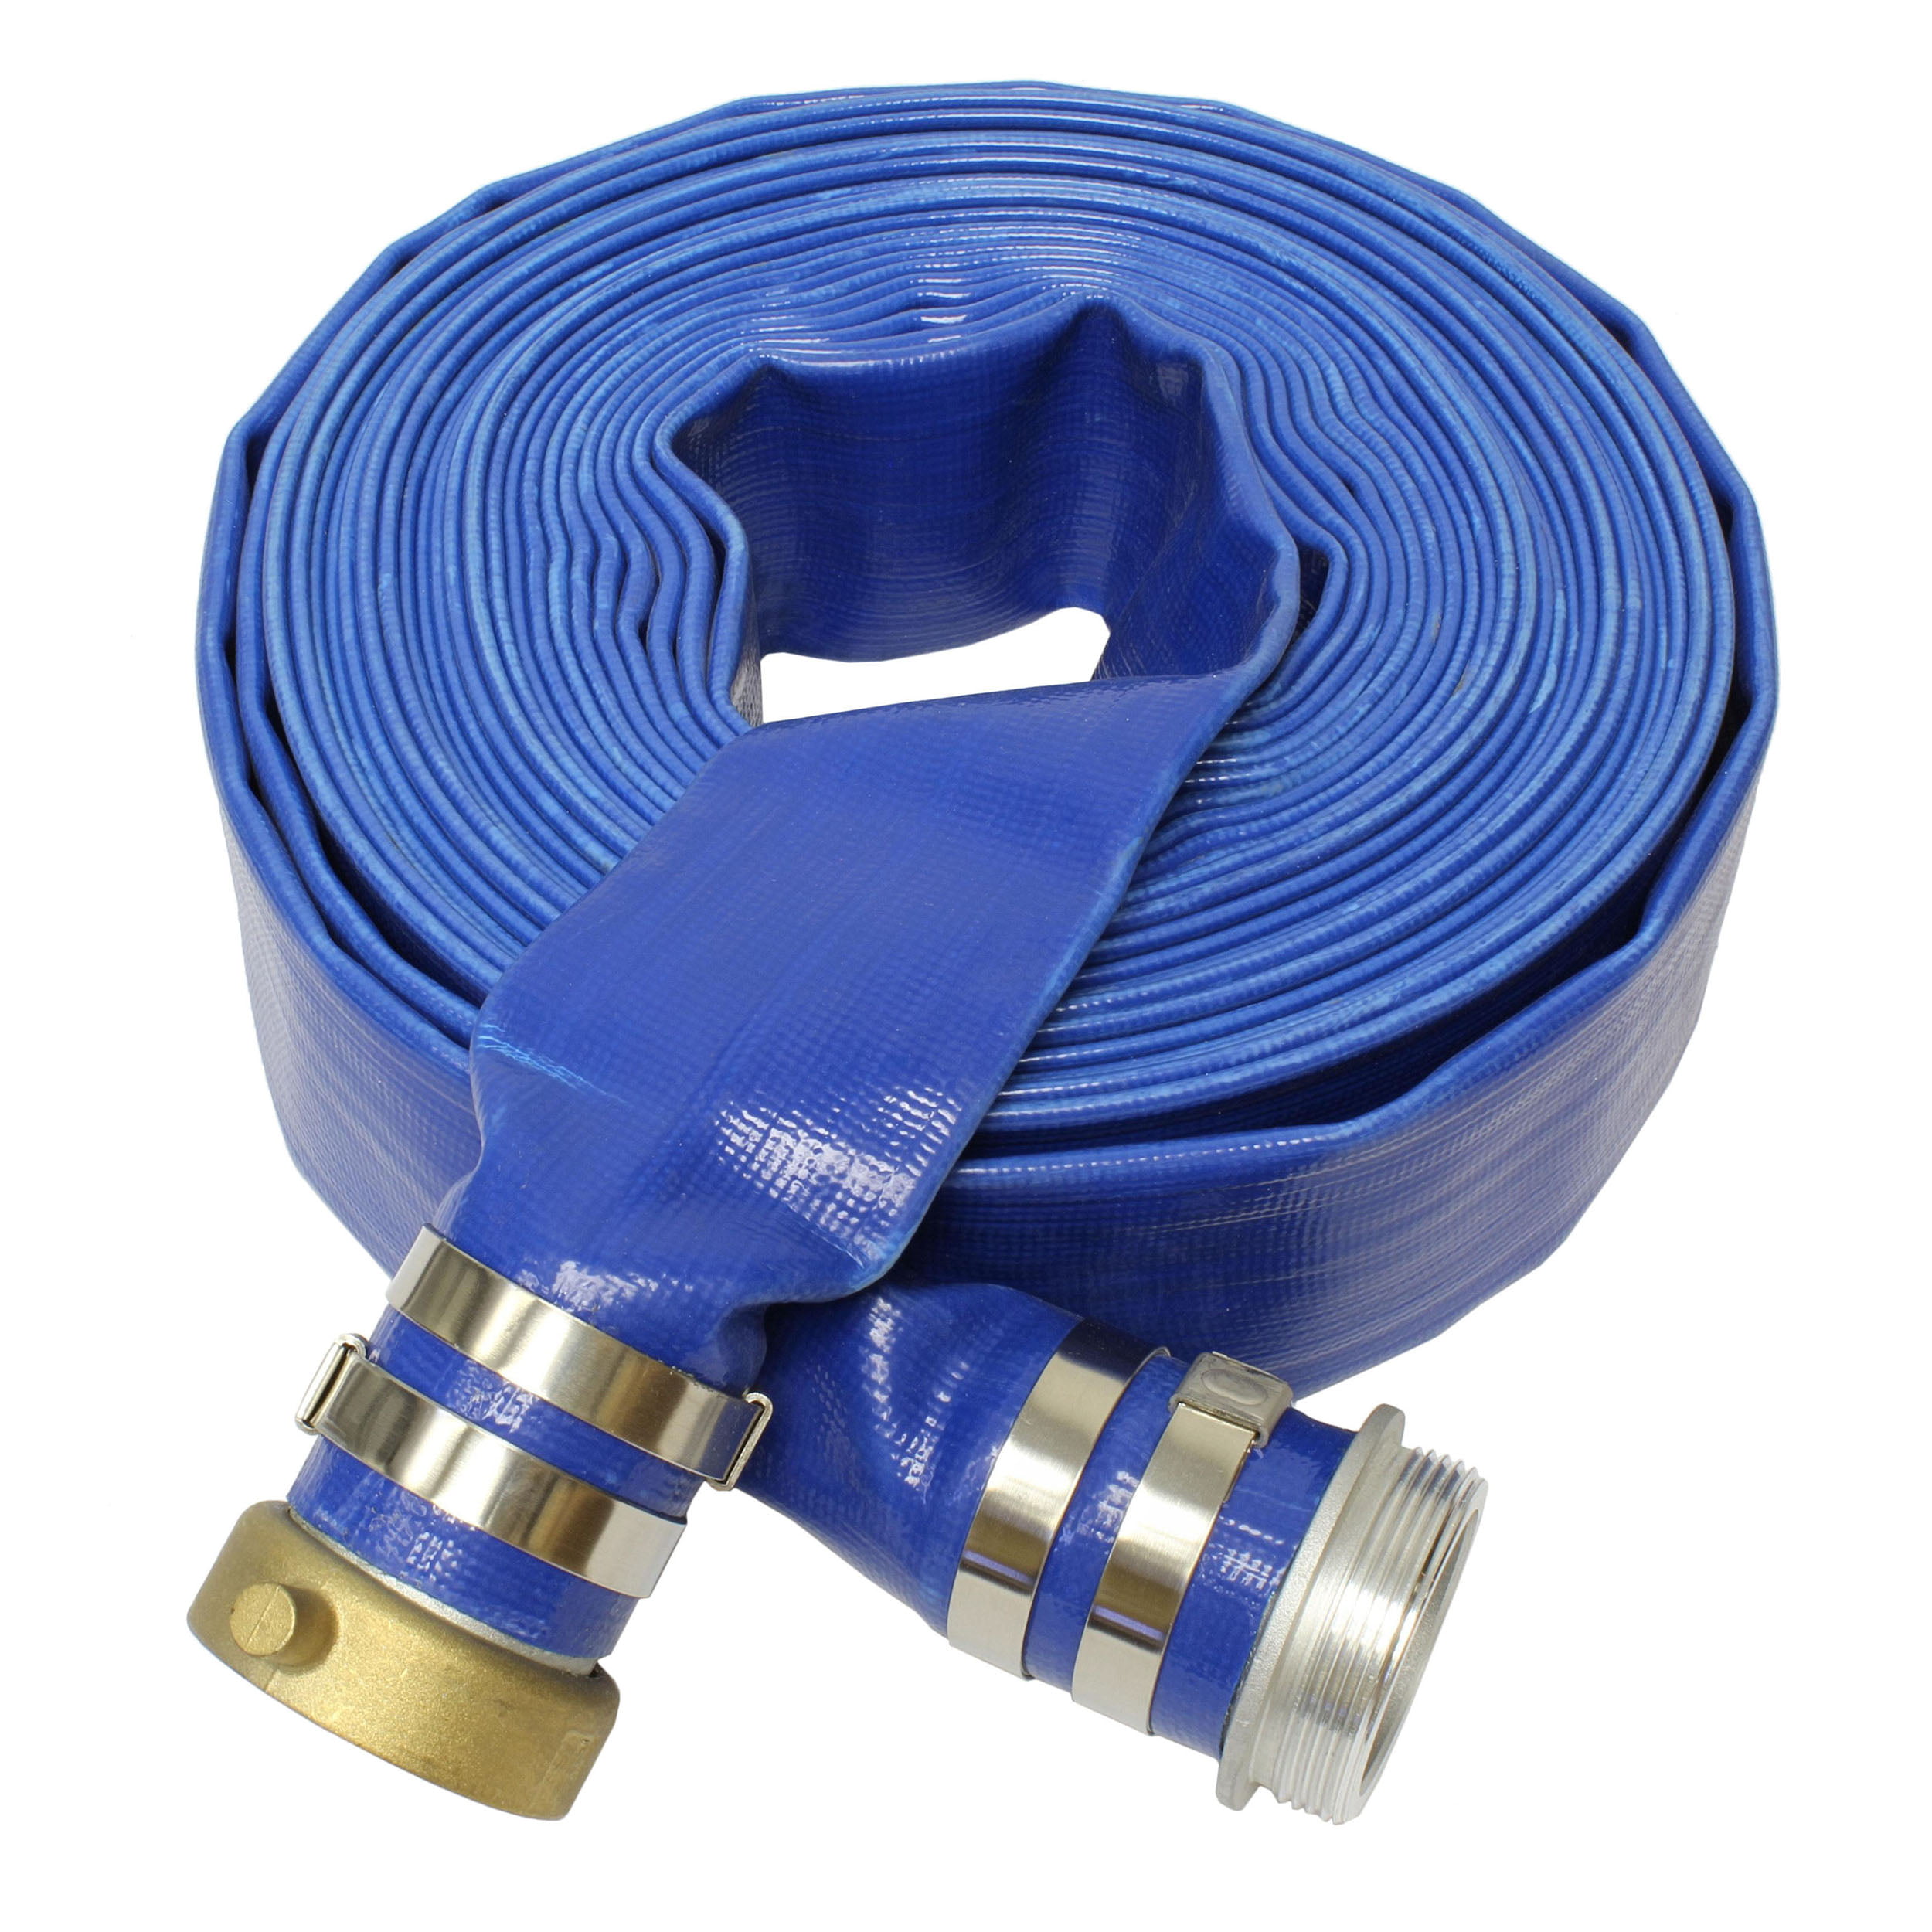 Red 2 IN by 100 FT Flat Lay PVC Pump Discharge Hose BISupplyDischarge Hose 